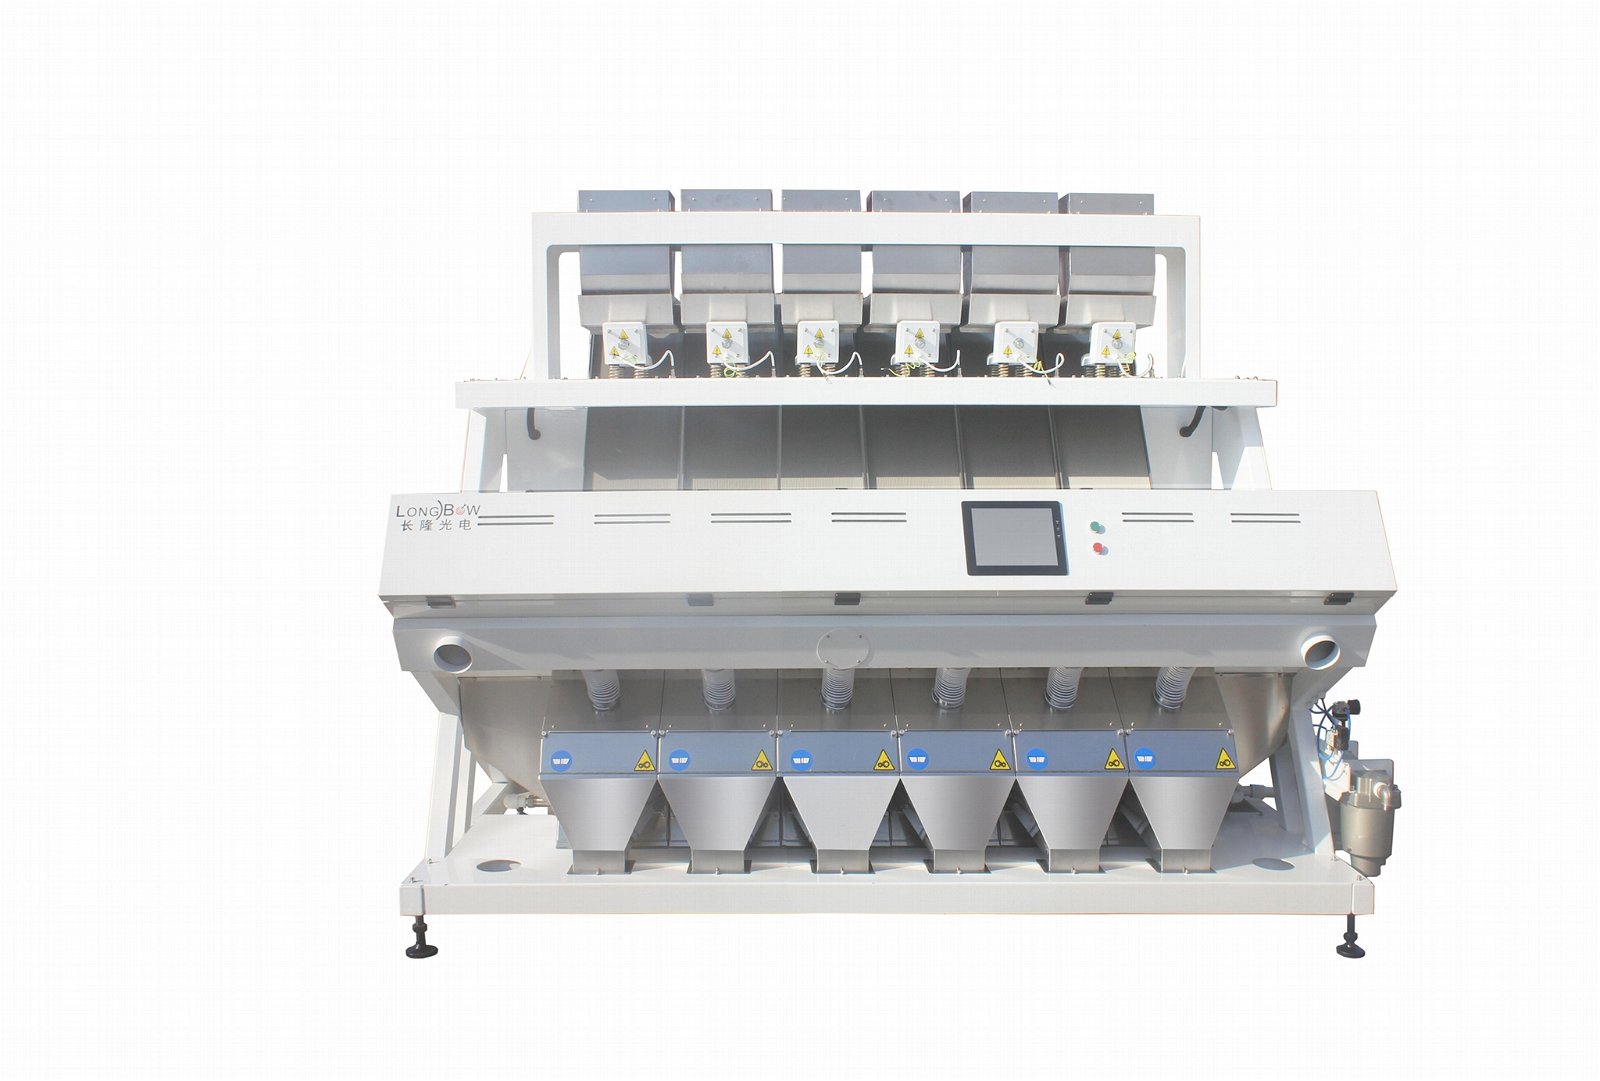 sunflower seeds sorter by color from manufacturer